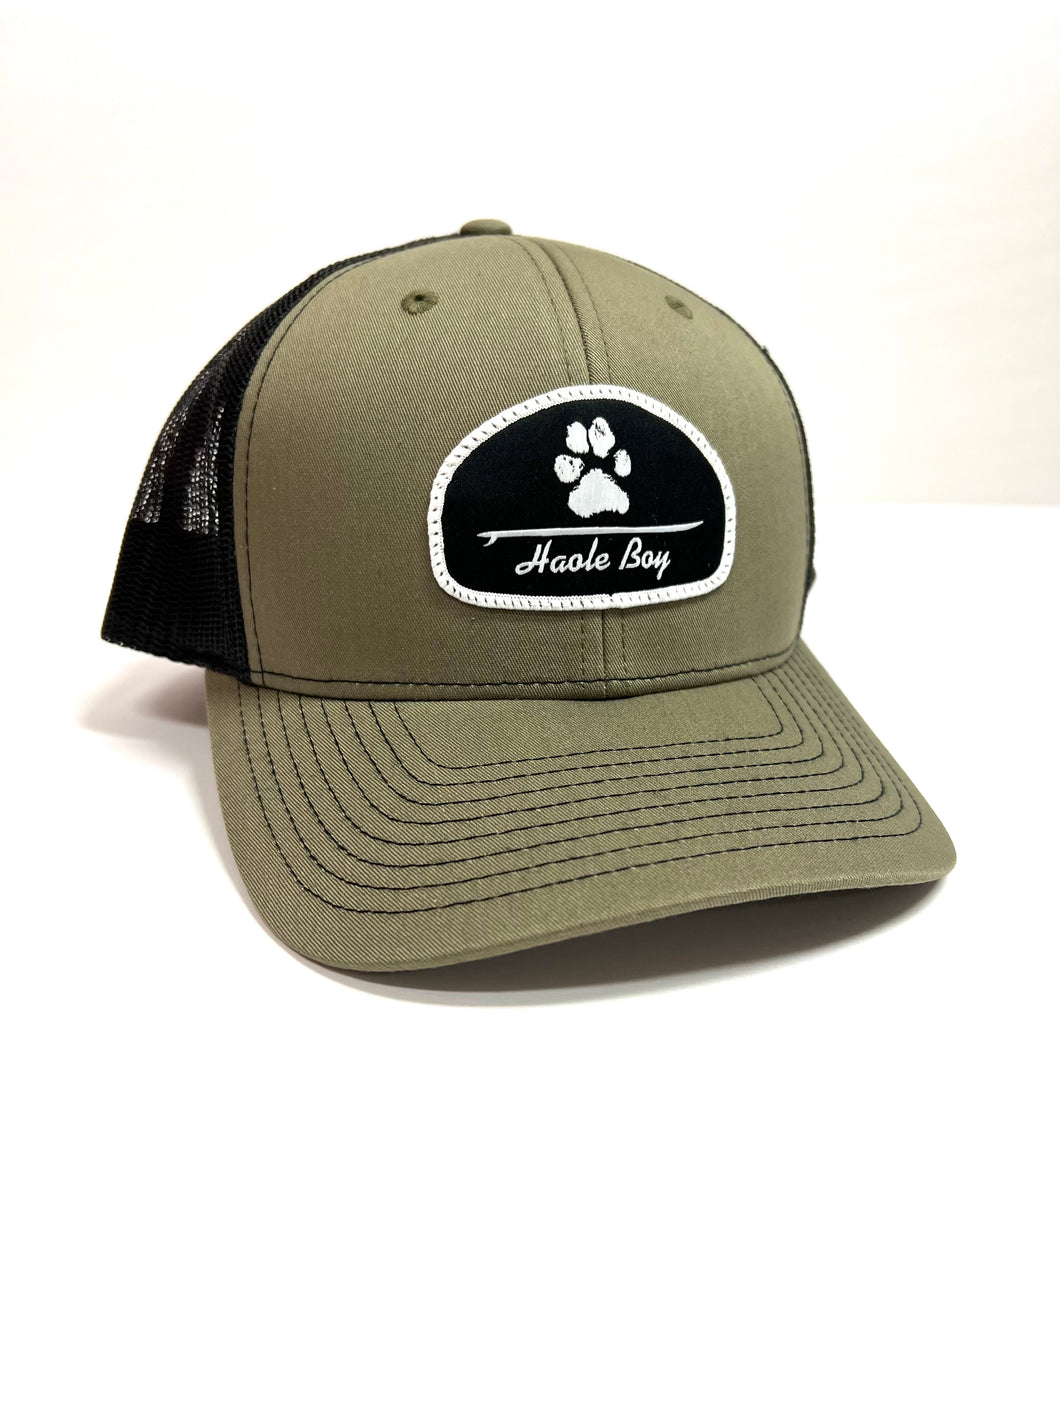 The Army/Black Surf Paw